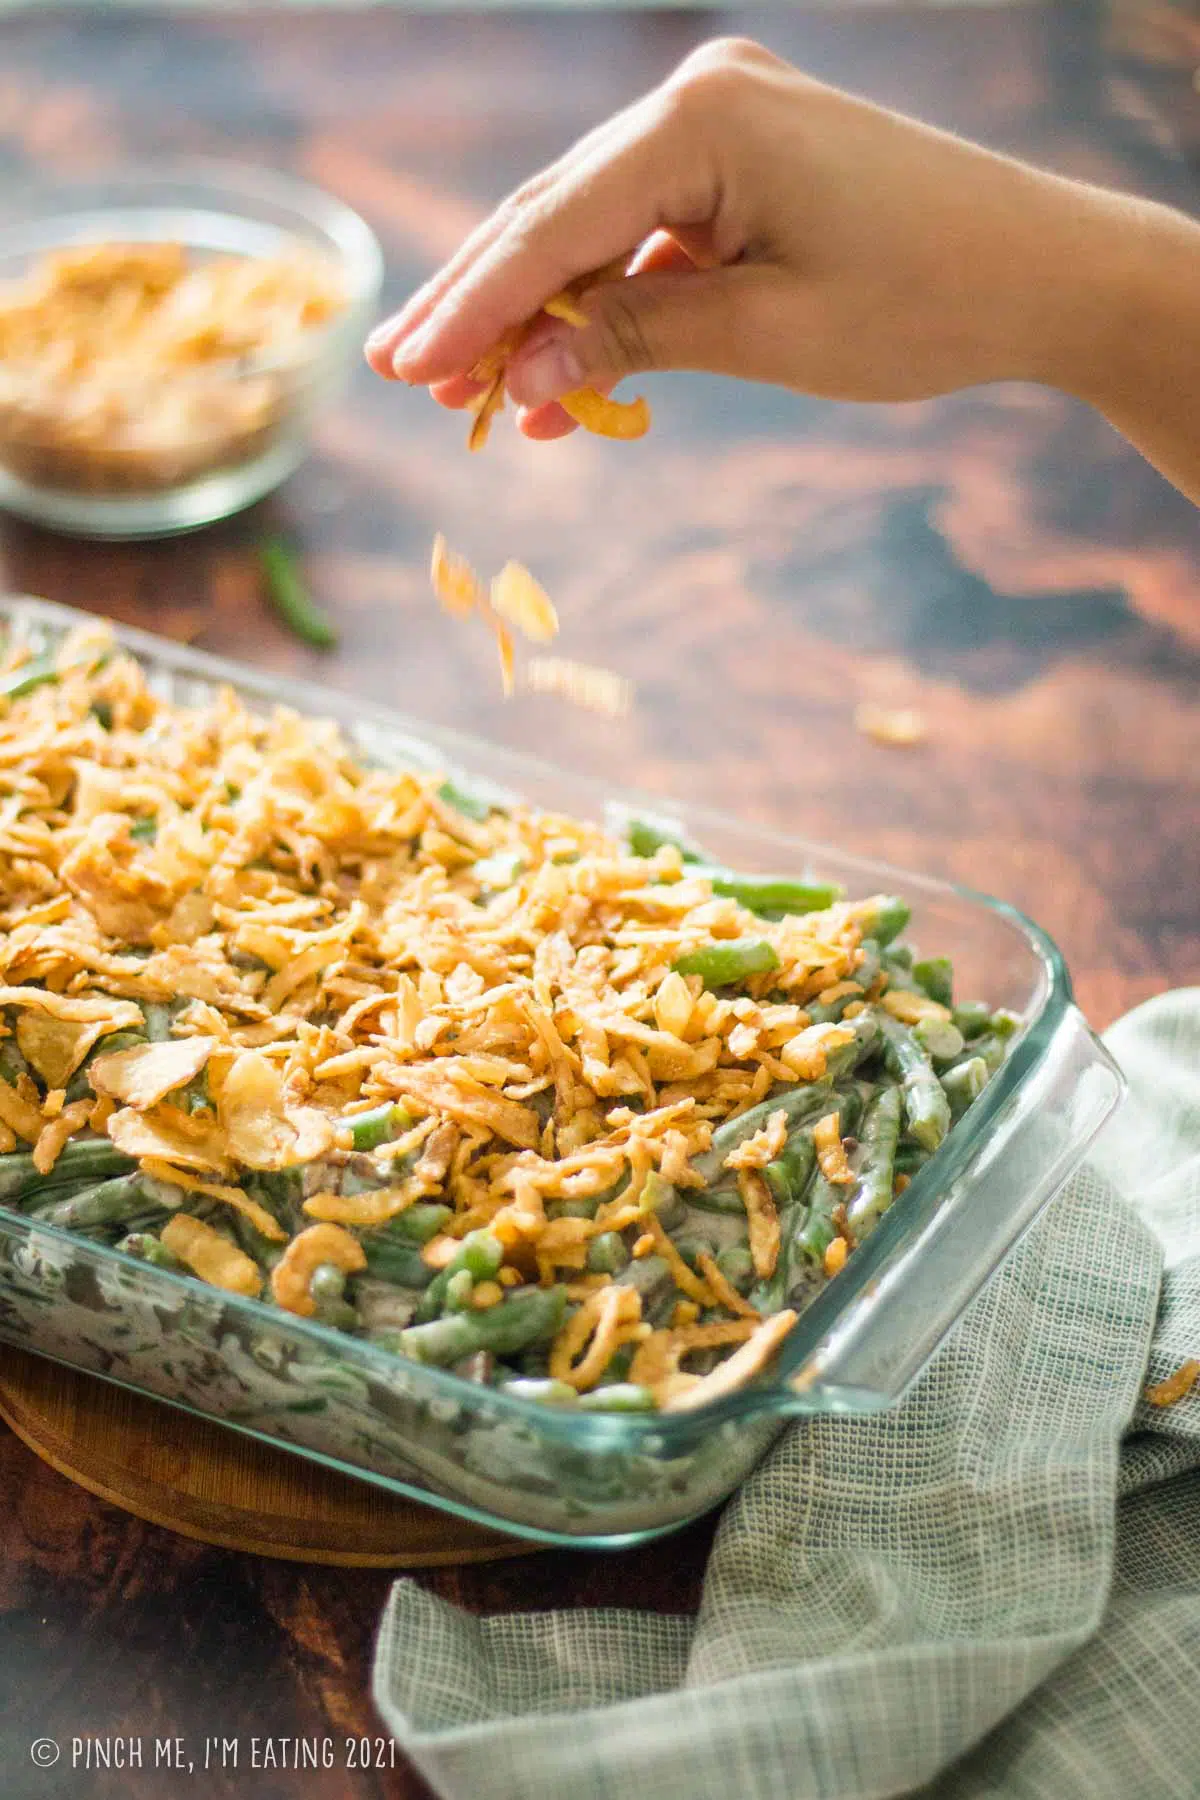 Hand sprinkling crispy fried onions over top of a green bean casserole in a glass baking dish.